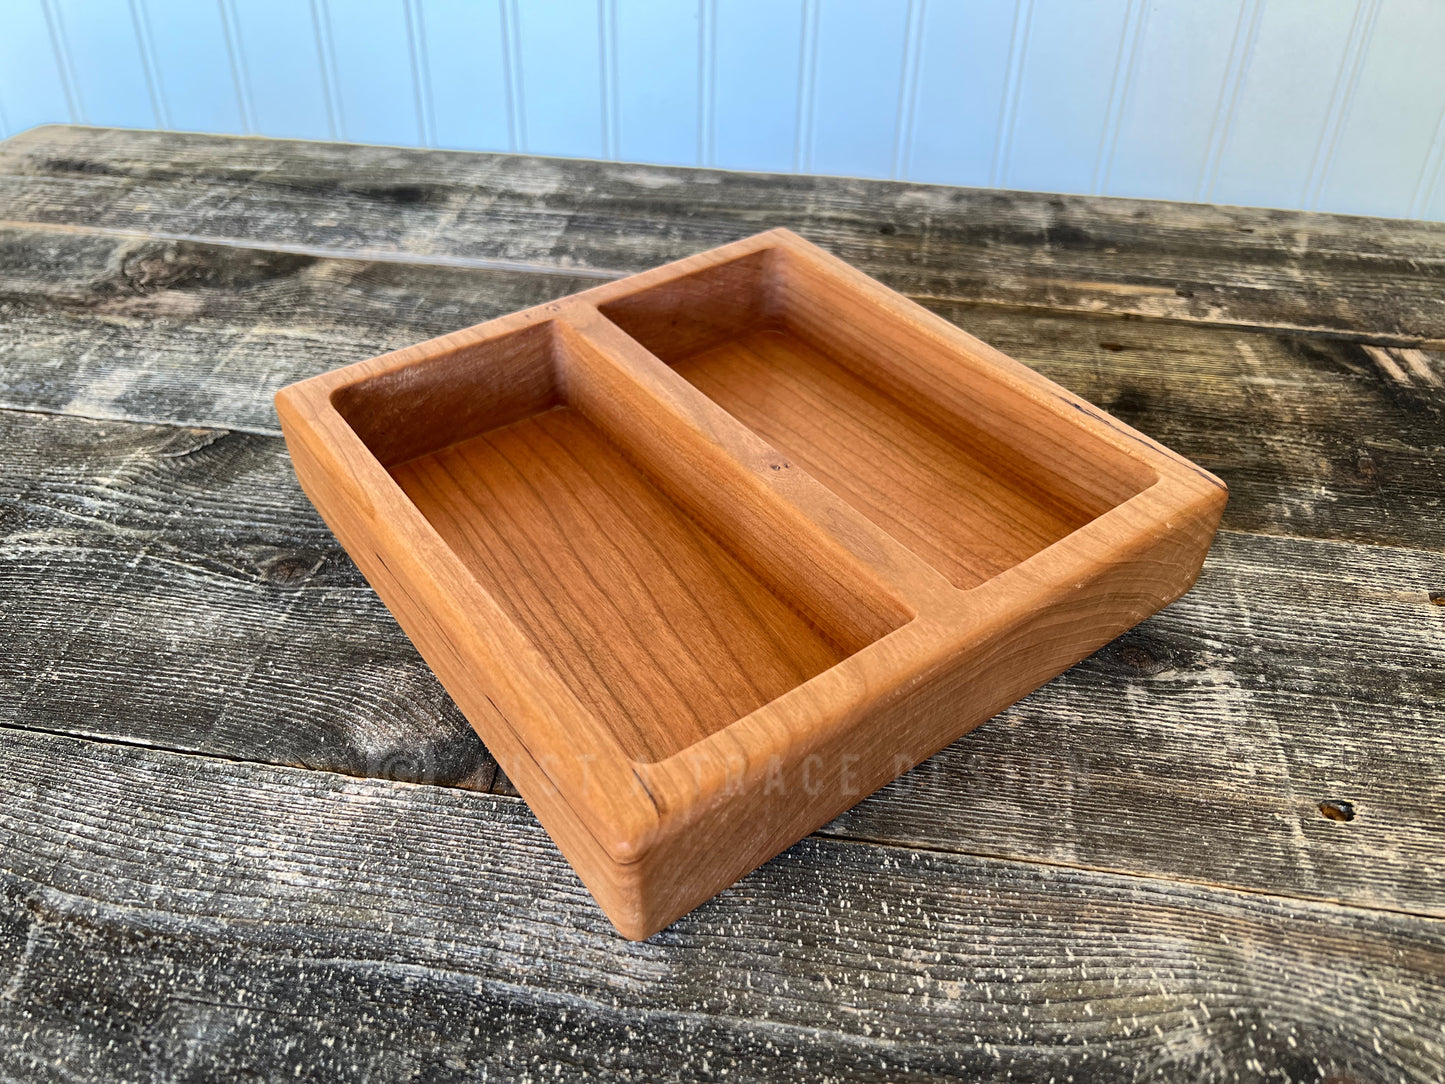 2 Compartment Square Wooden Snack Tray, Nut Tray, Chip Tray, Snack Bowl, Appetizer Tray, Wood Platter, Serving Tray, Serving Dish, Candy Dish